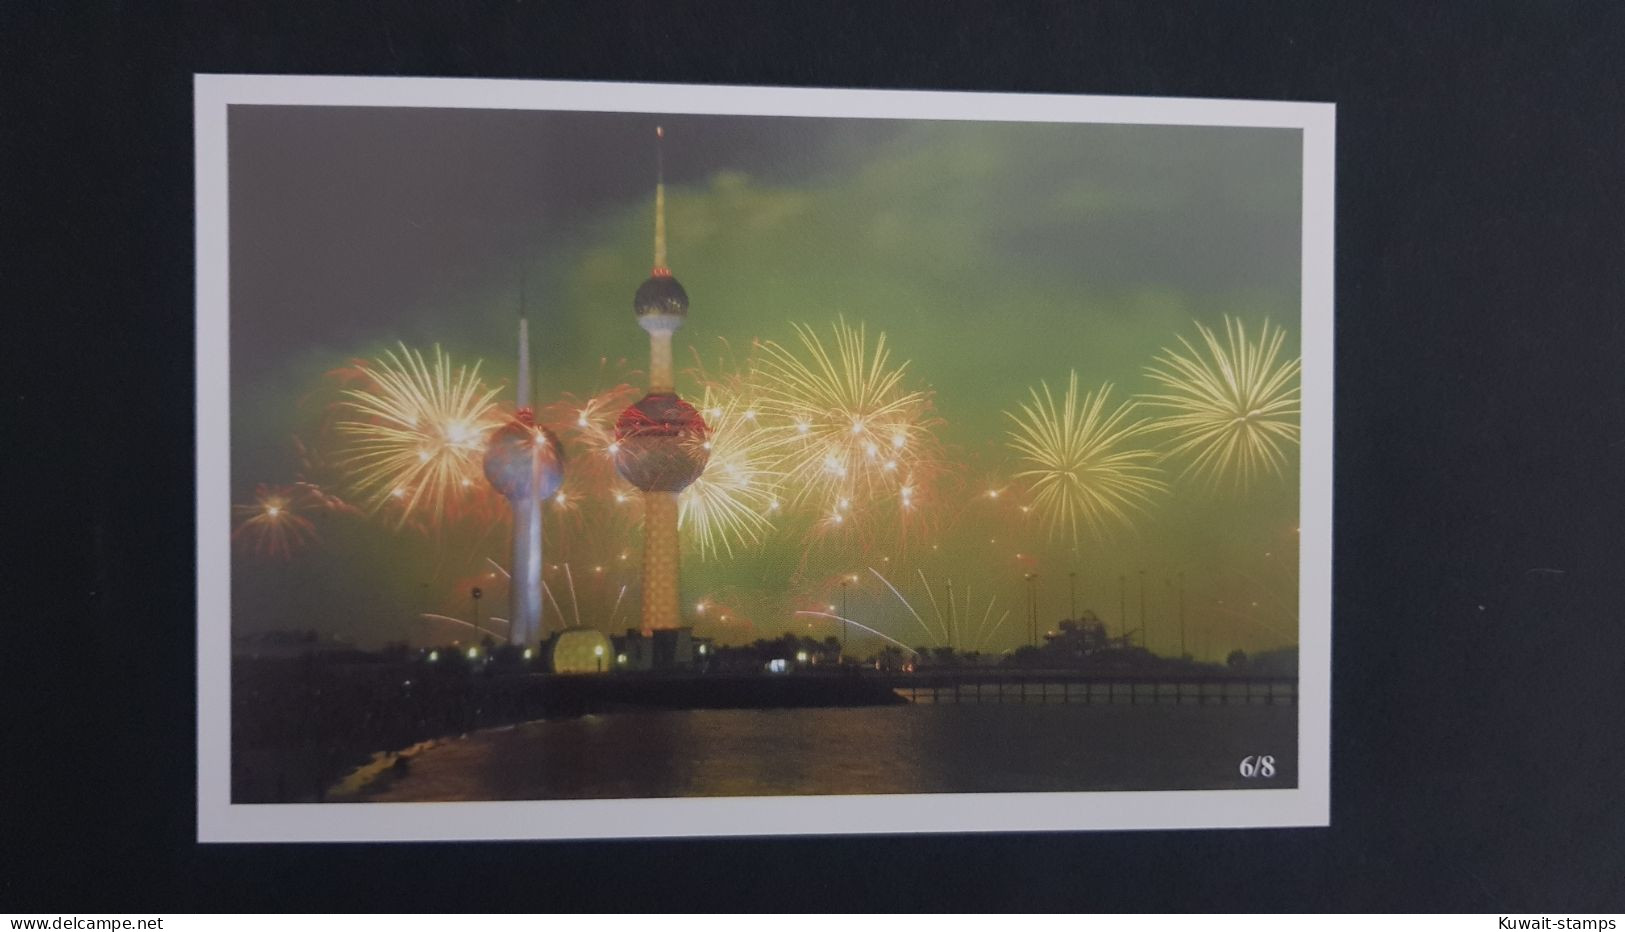 Postcards 6/8 - Celebration Of National Day And Liberation Day In Kuwait Towers 25/26 Feb 2022 - Kuwait